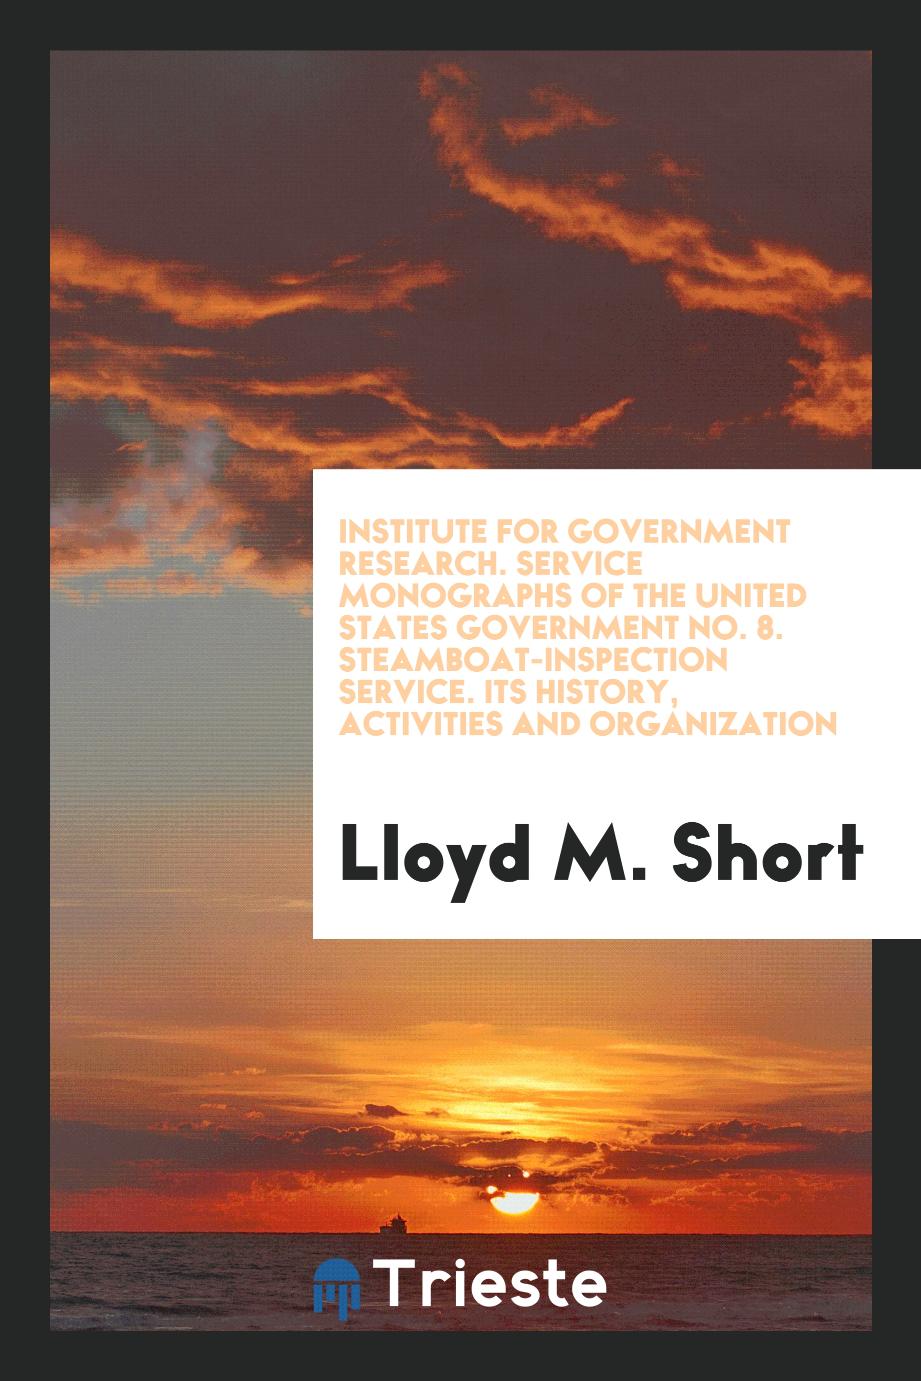 Institute for Government Research. Service Monographs of the United States Government No. 8. Steamboat-Inspection Service. Its History, Activities and Organization